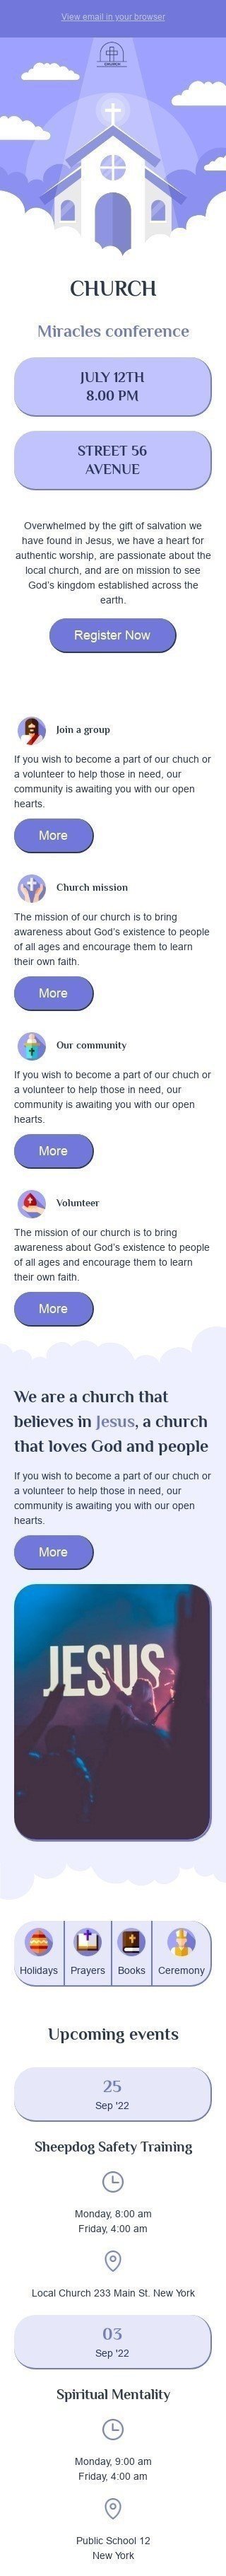 Promo Email Template "Miracles conference" for Church industry mobile view